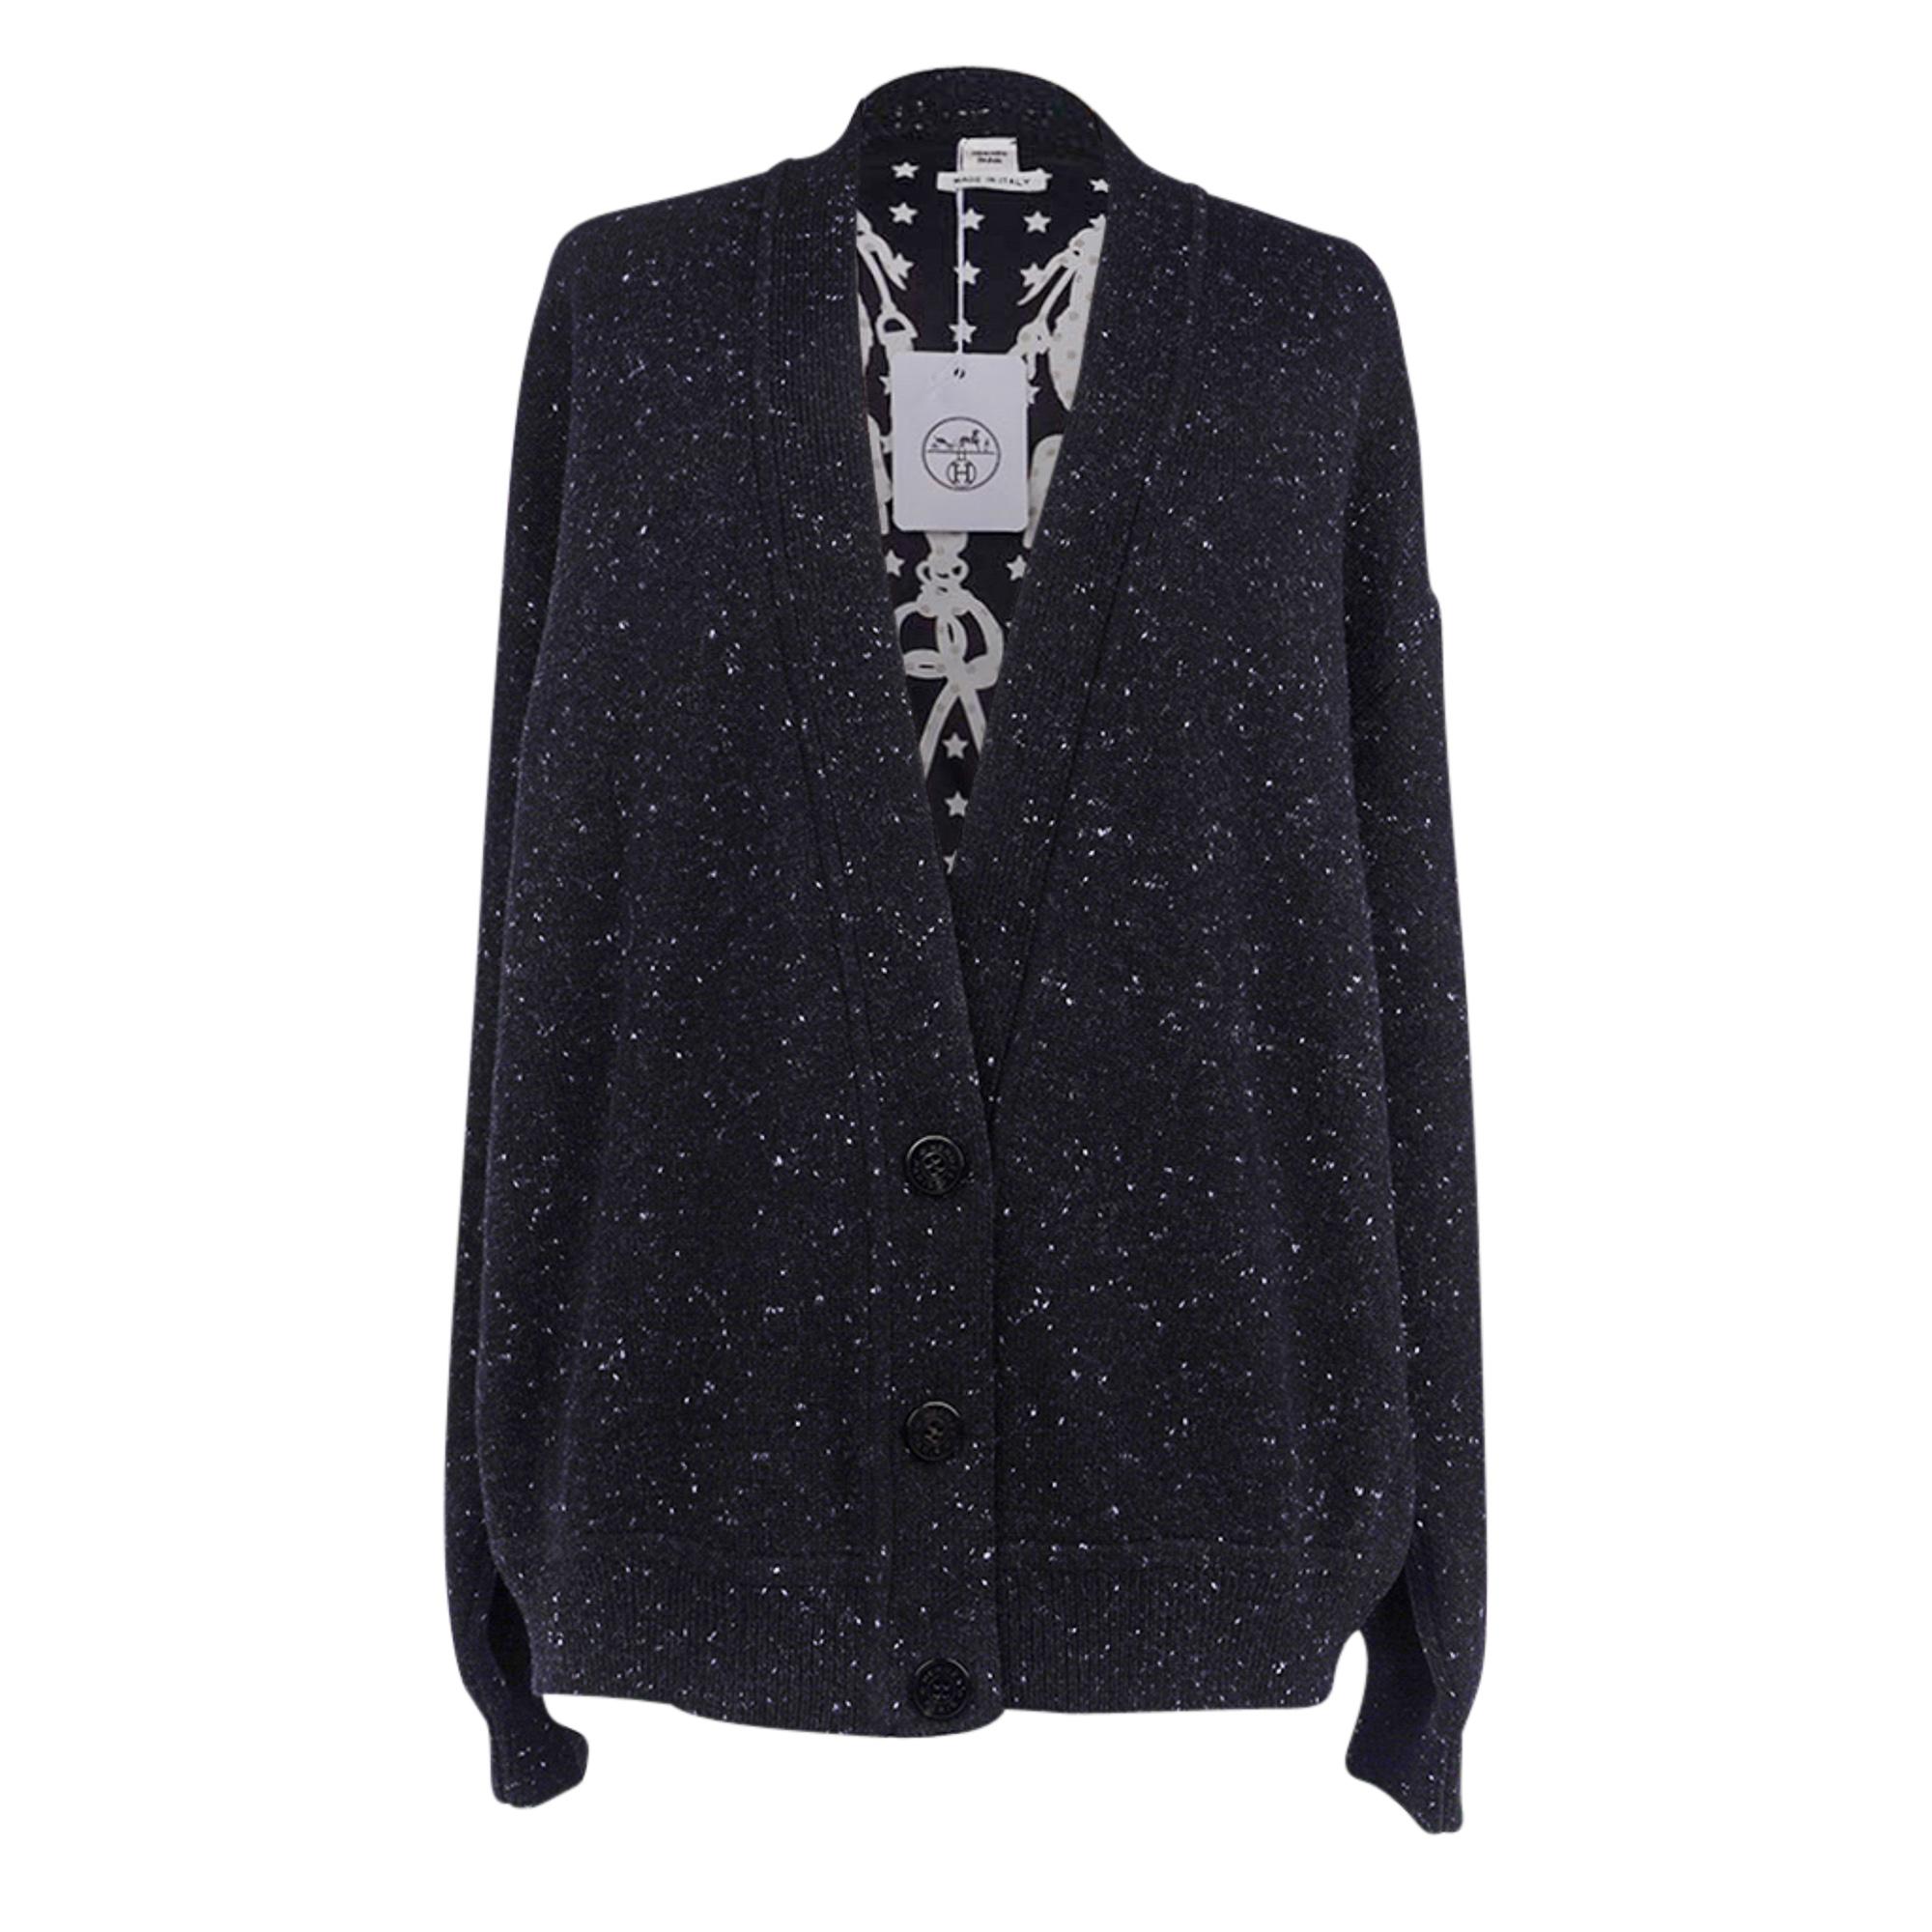 Mightychic offers a guaranteed authentic Hermes Brides de Gala twillaine V neck cashmere tweed cardigan in Black, White and Gray.
Rear depicts the Brides de Gala in silk, the most popular and recognizable scarf print Hermes has made -